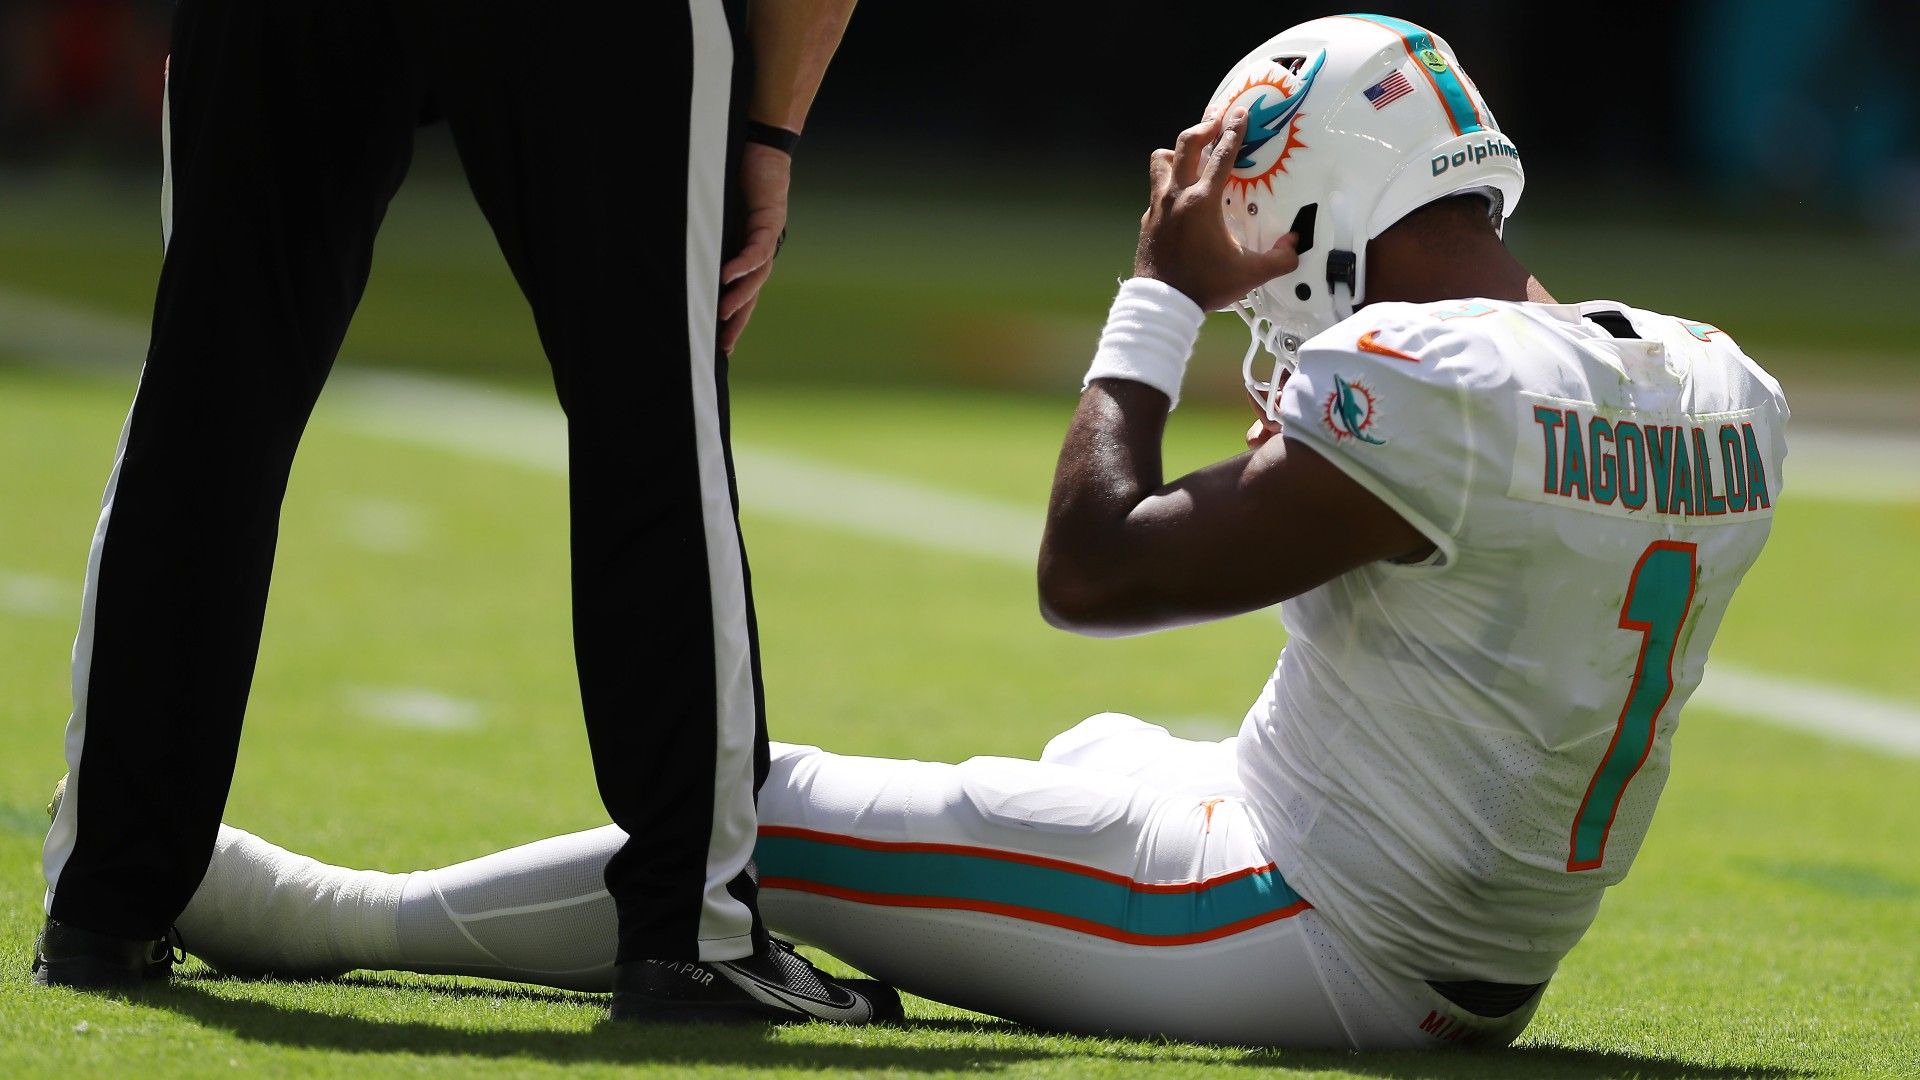 NFL investigation launched into medical decision on wobbly Miami Dolphins star